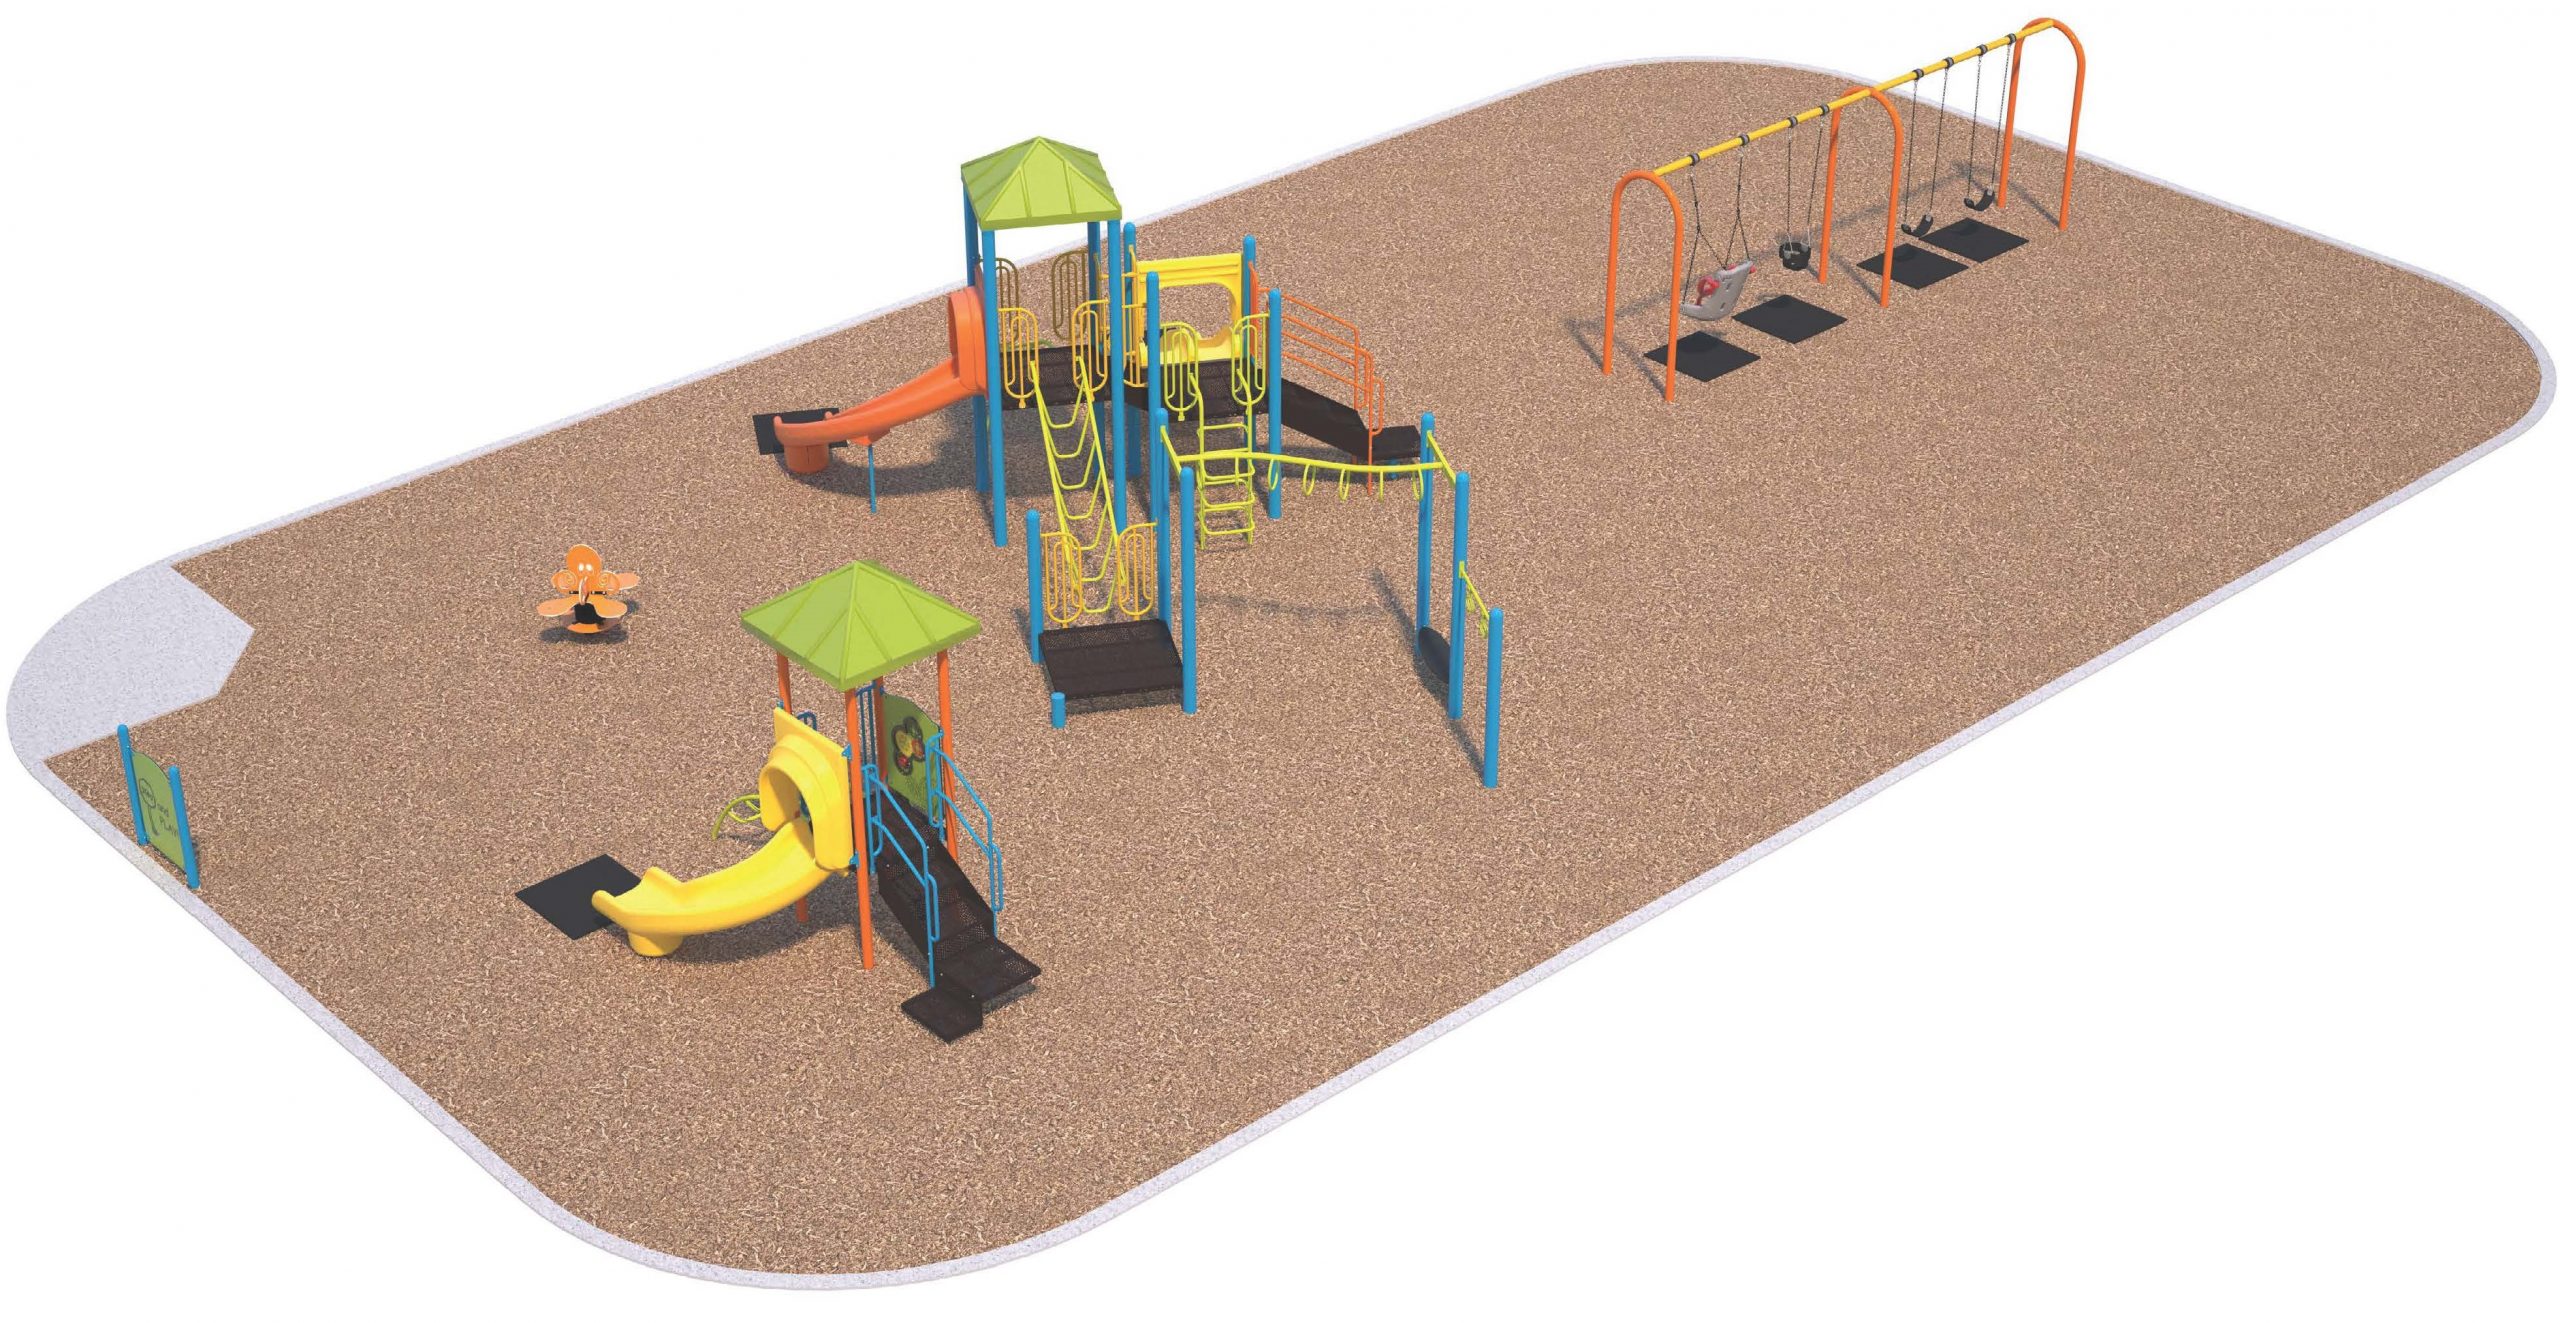 This rendering is a birds eye view of the whole playground with a swing set on the far right, senior climber in the middle, octopus multi-person spring toy, junior climber and ground level activity panel on the left